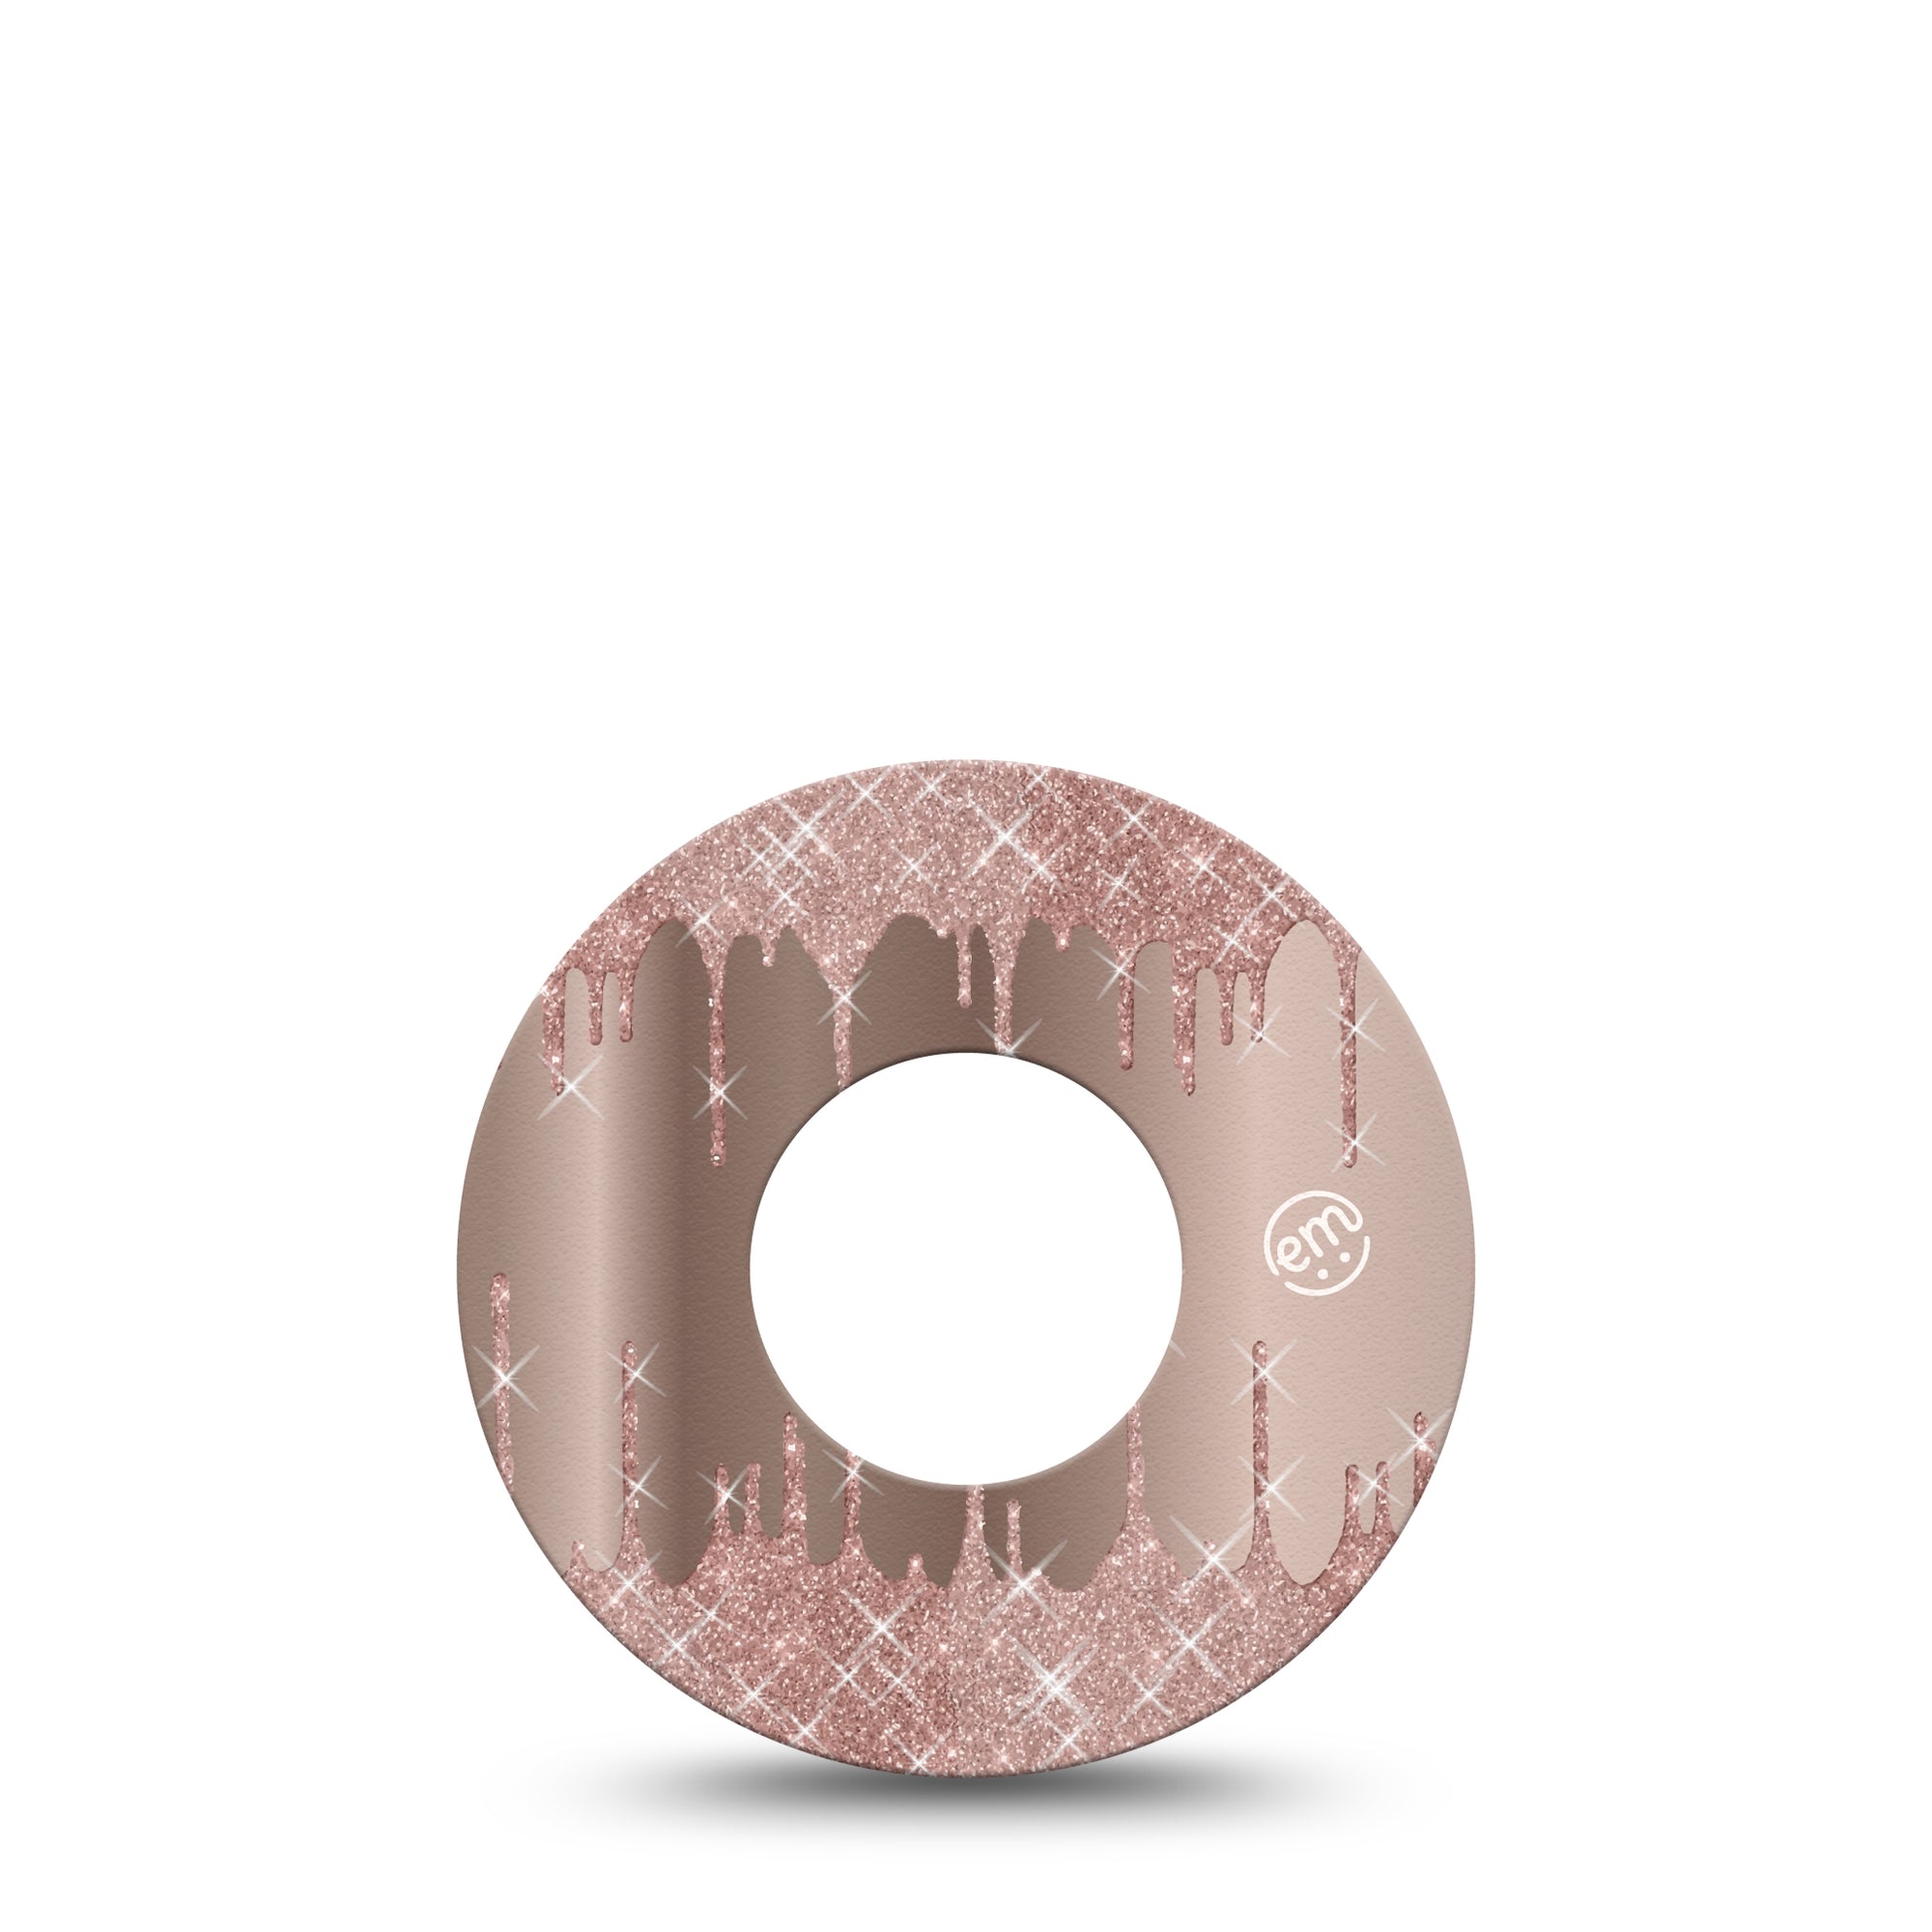 ExpressionMed Dripping Sparkles Libre Tape